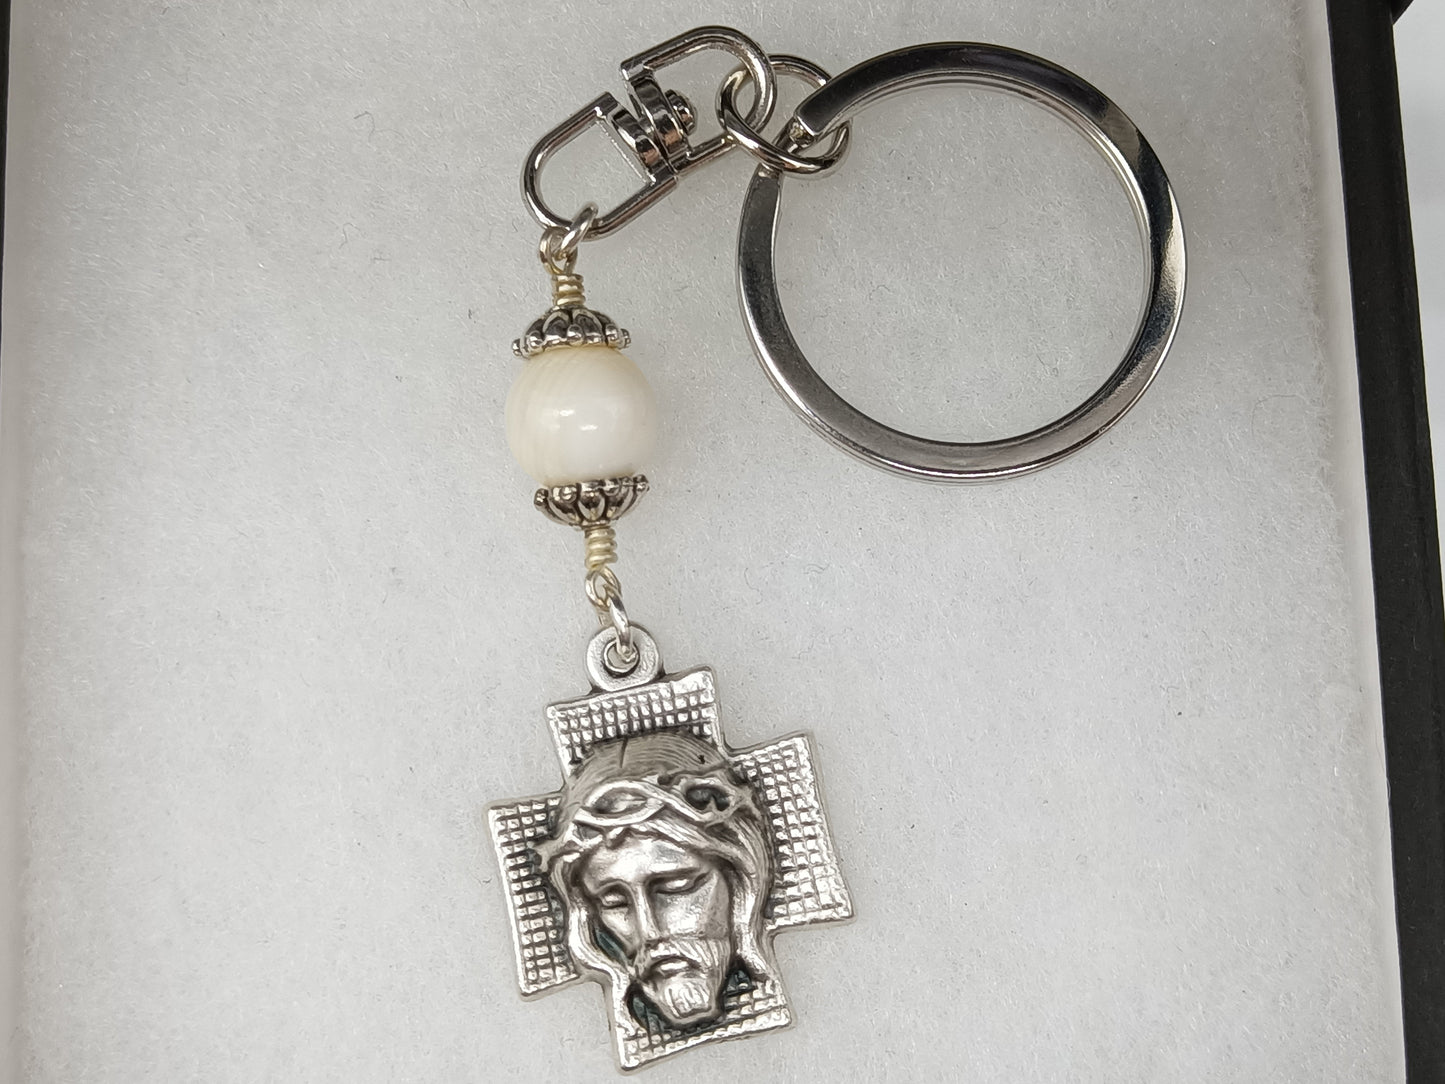 Holy Face of Jesus unbreakable key fob, Turin Shroud key chain, purse clip, Religious key chain, Patron Saints, Vintage gifts, Rosaries.